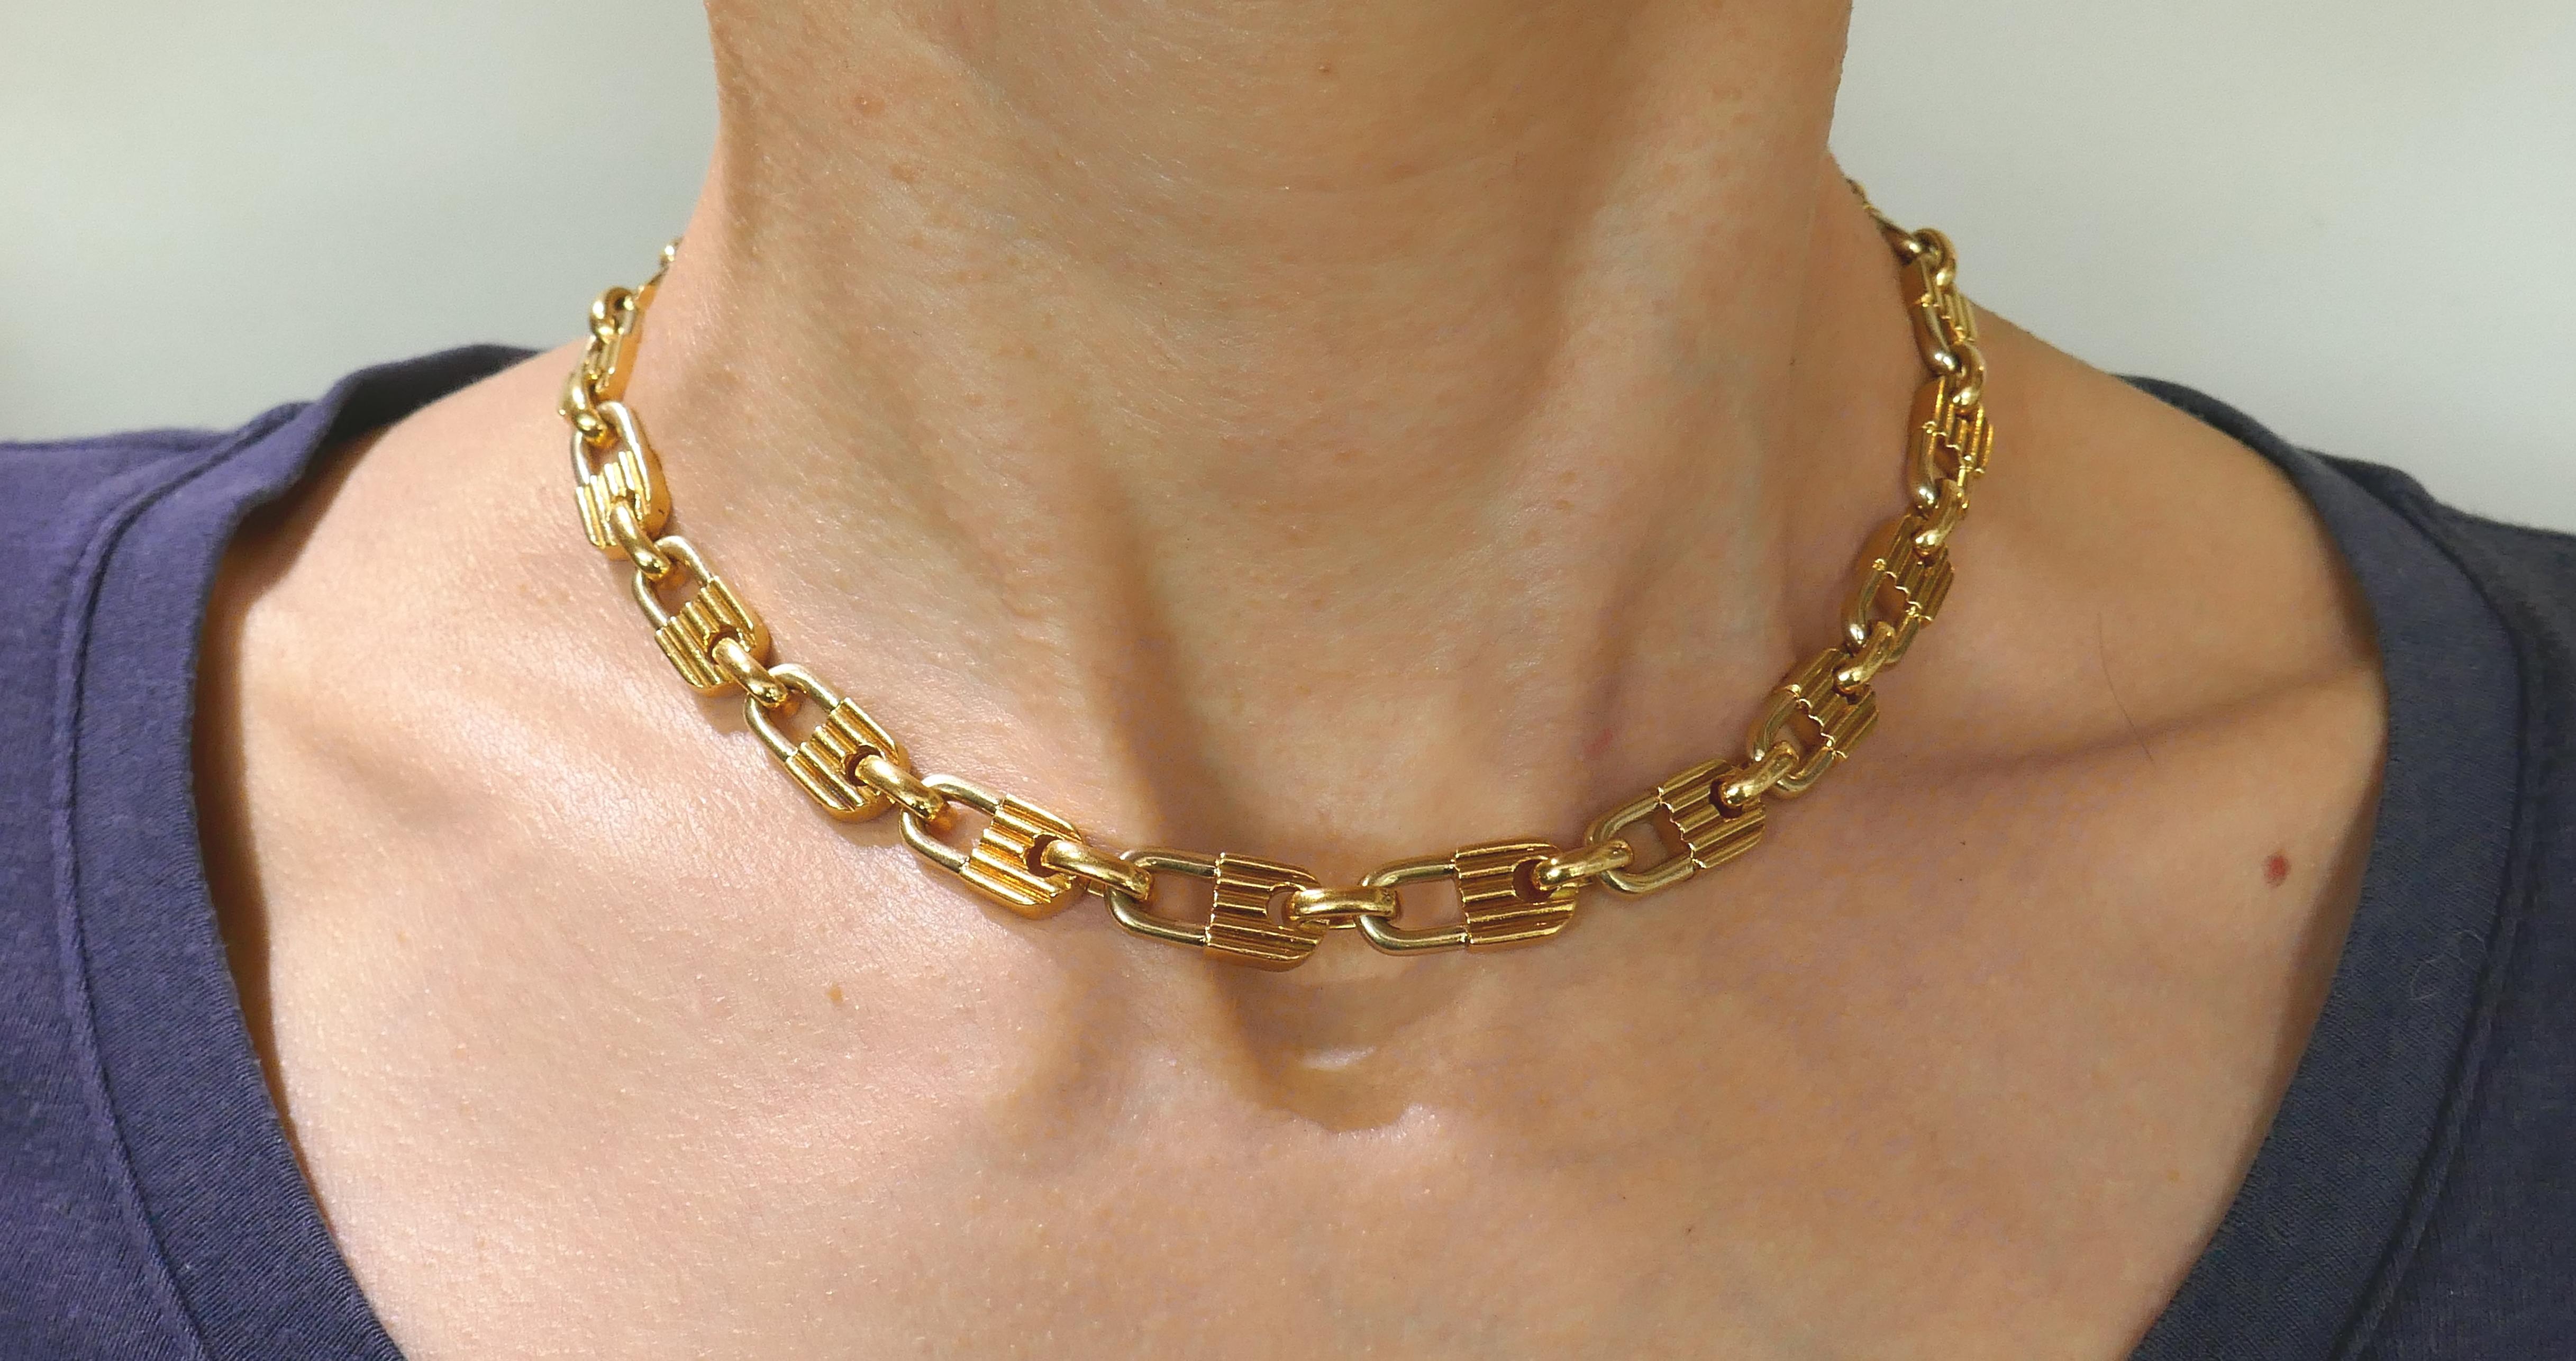 Edgy yet elegant chain necklace created by Mauboussin in France in the 1970s. Chic, smooth and wearable, the necklace is a great addition to your jewelry collection.
The necklace is made of 18 karat yellow gold. 
It measures 16 x 5/16 inches (40 x